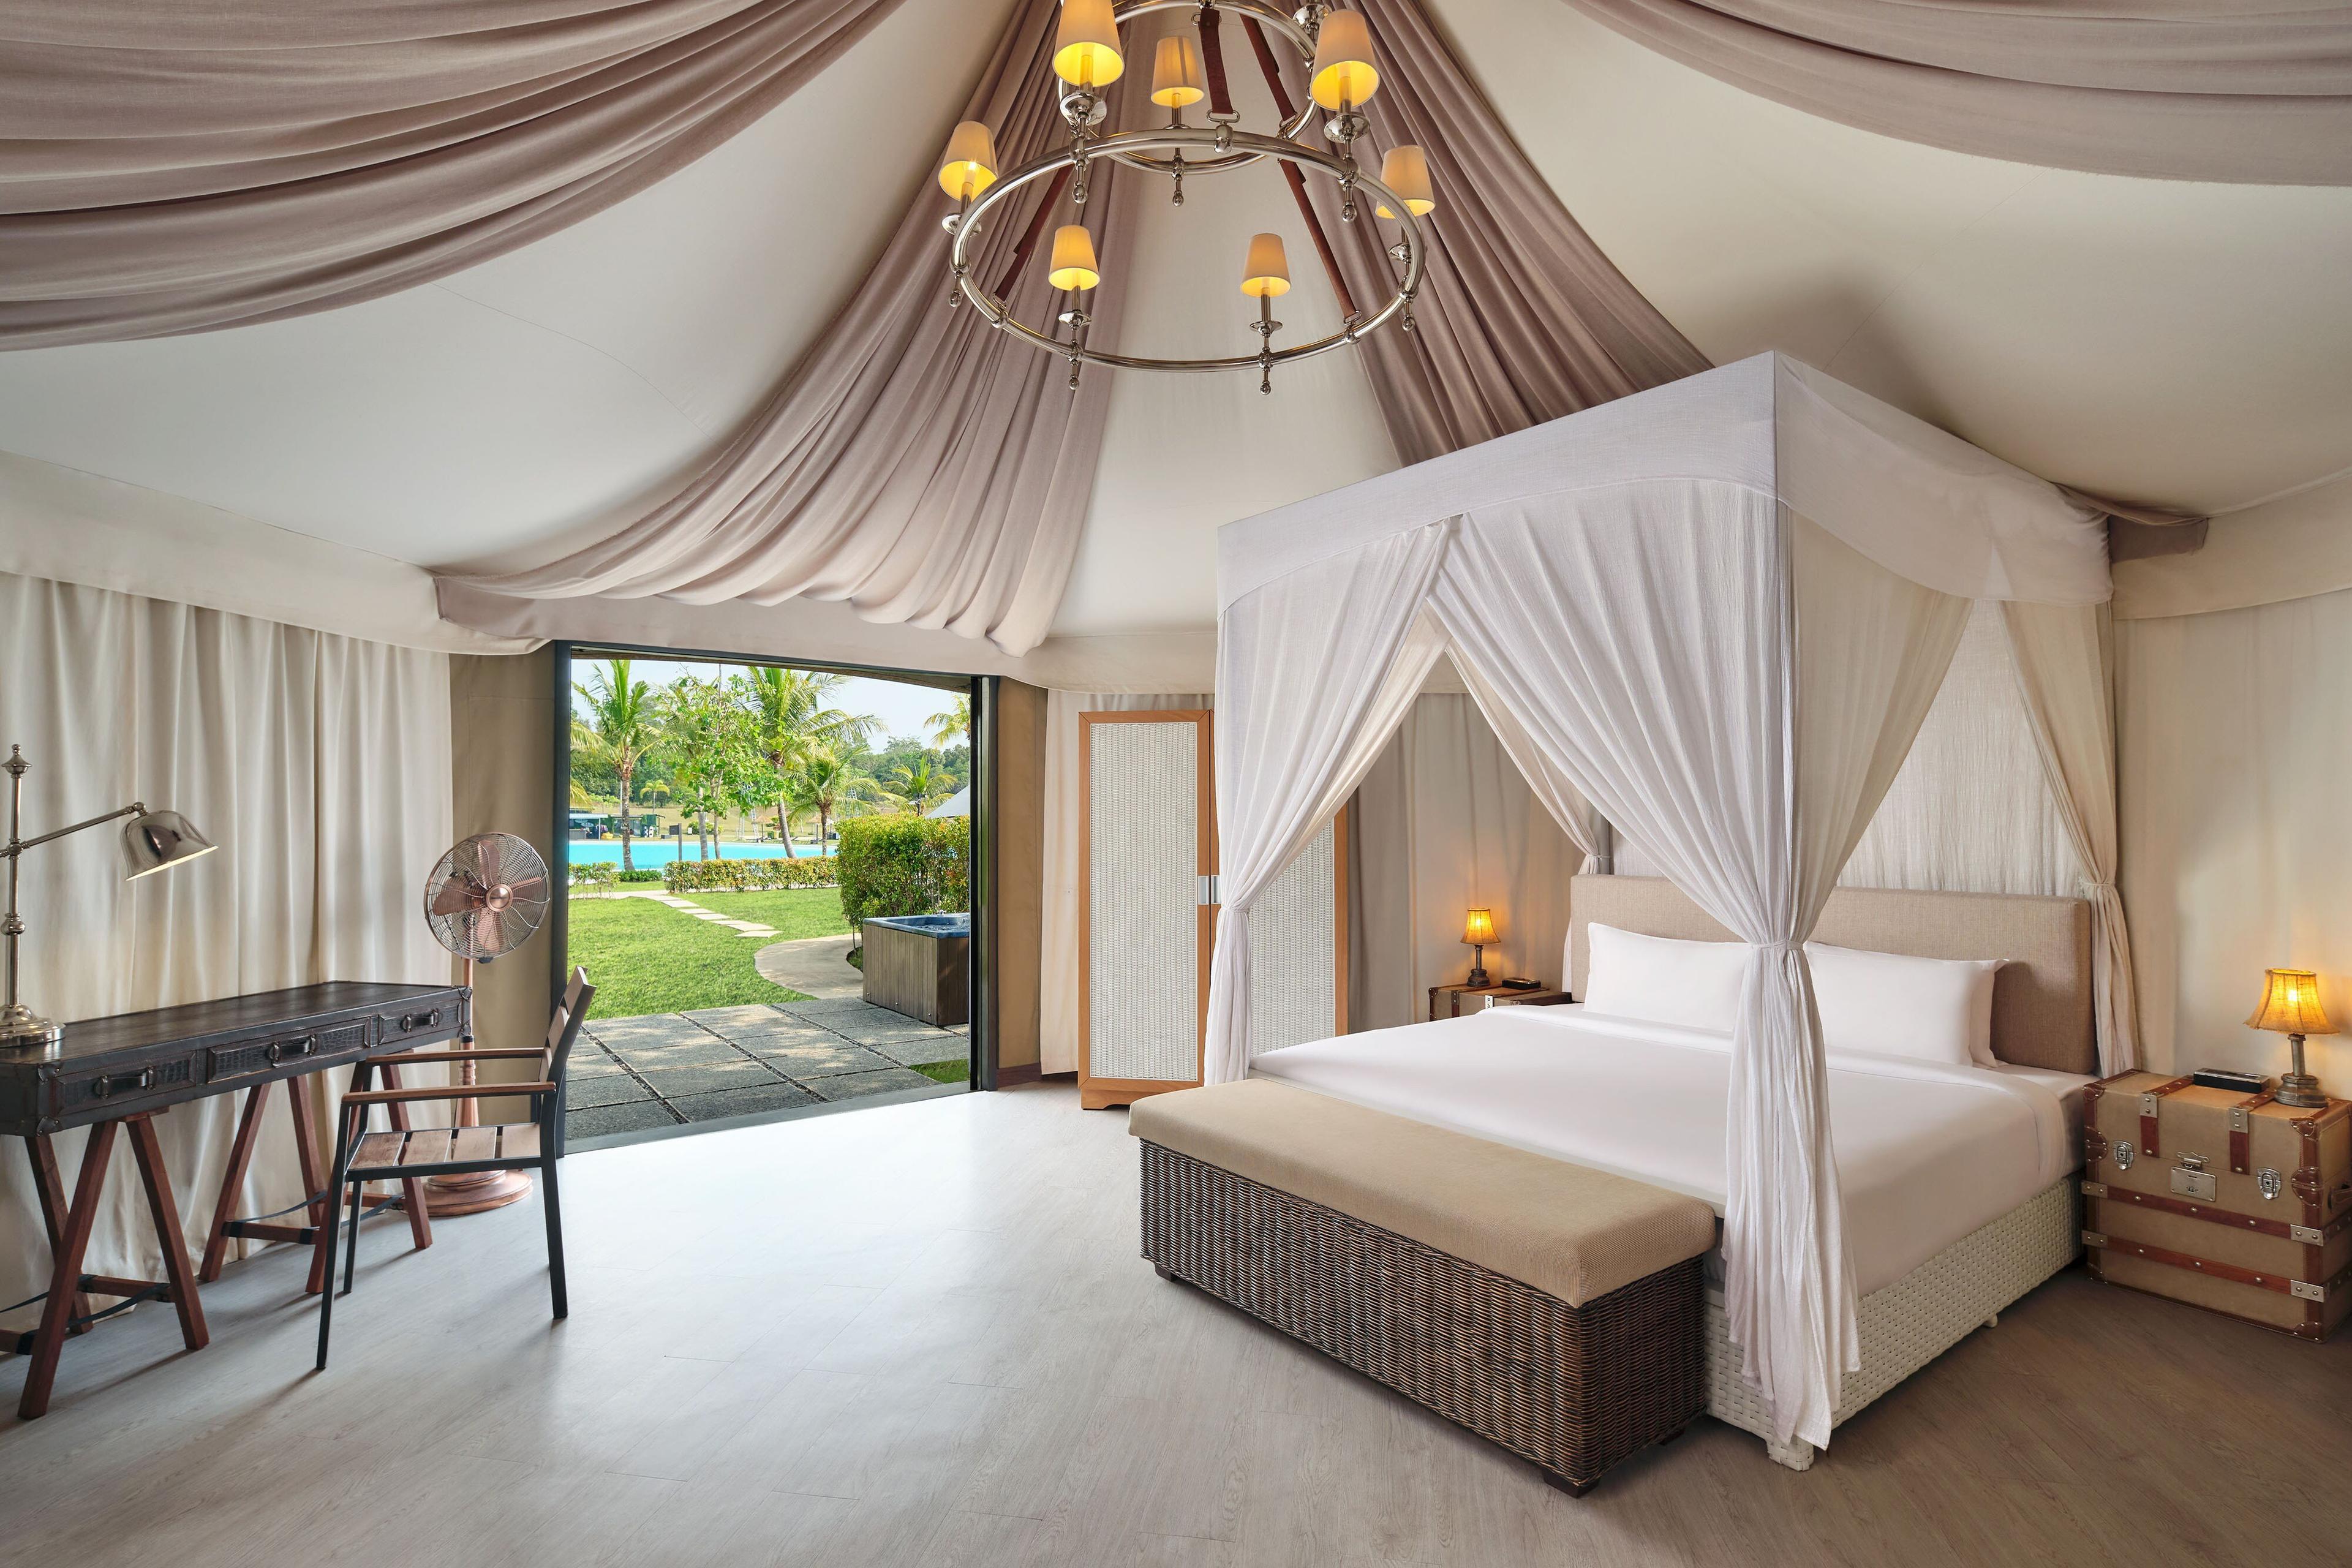 Enjoy our comfortable Deluxe-Size Tent, which offers spectacular views of our iconic Lagoon Beach.